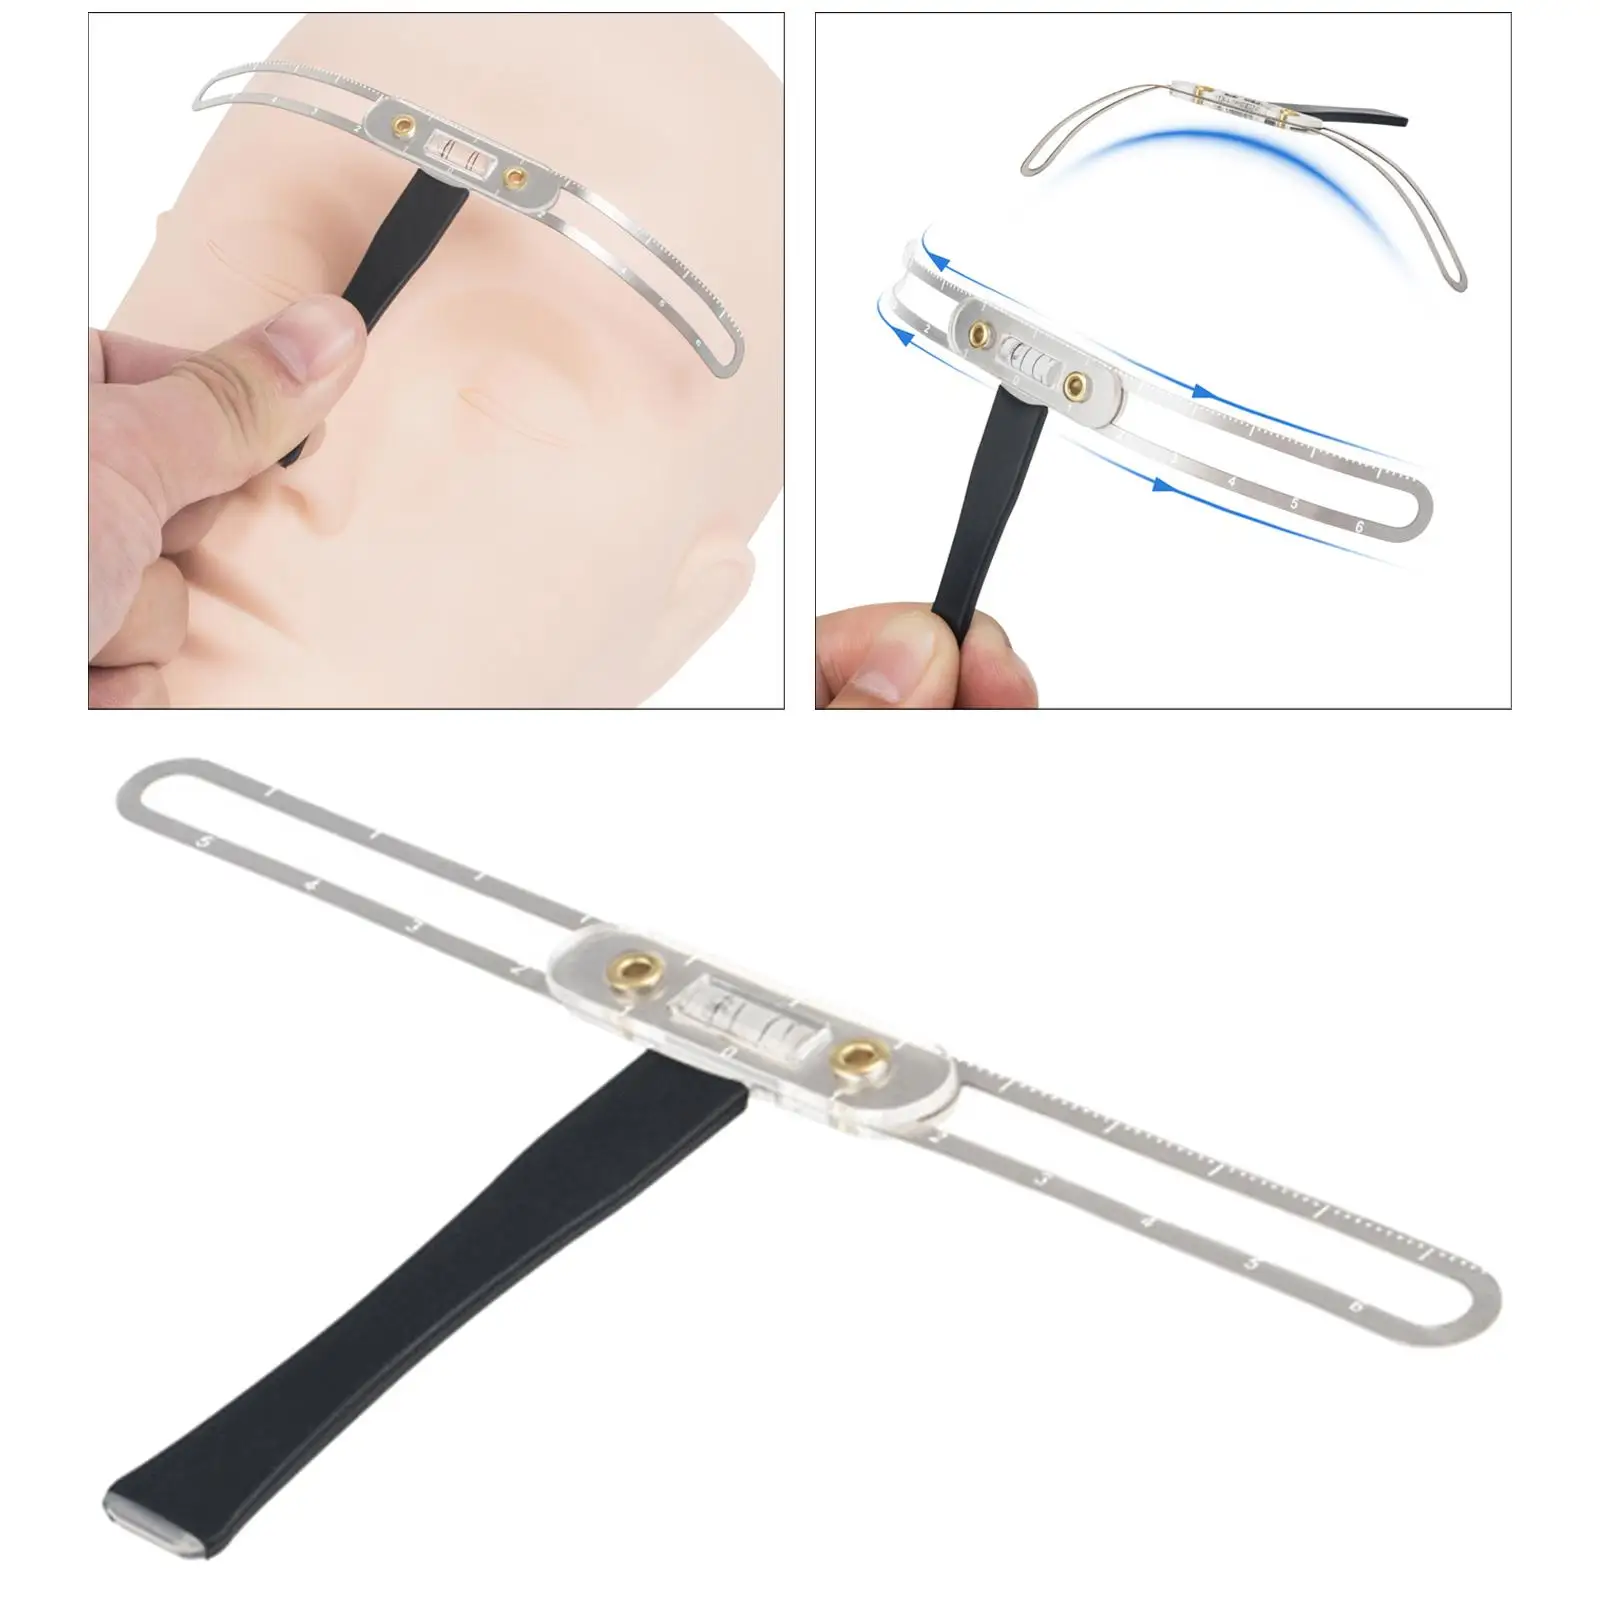 Eyebrow Caliper Makeup Accessories DIY Ruler Calipers Symmetrical Tool Eyebrow Extension Permanent Tattoo Positioning Shaping